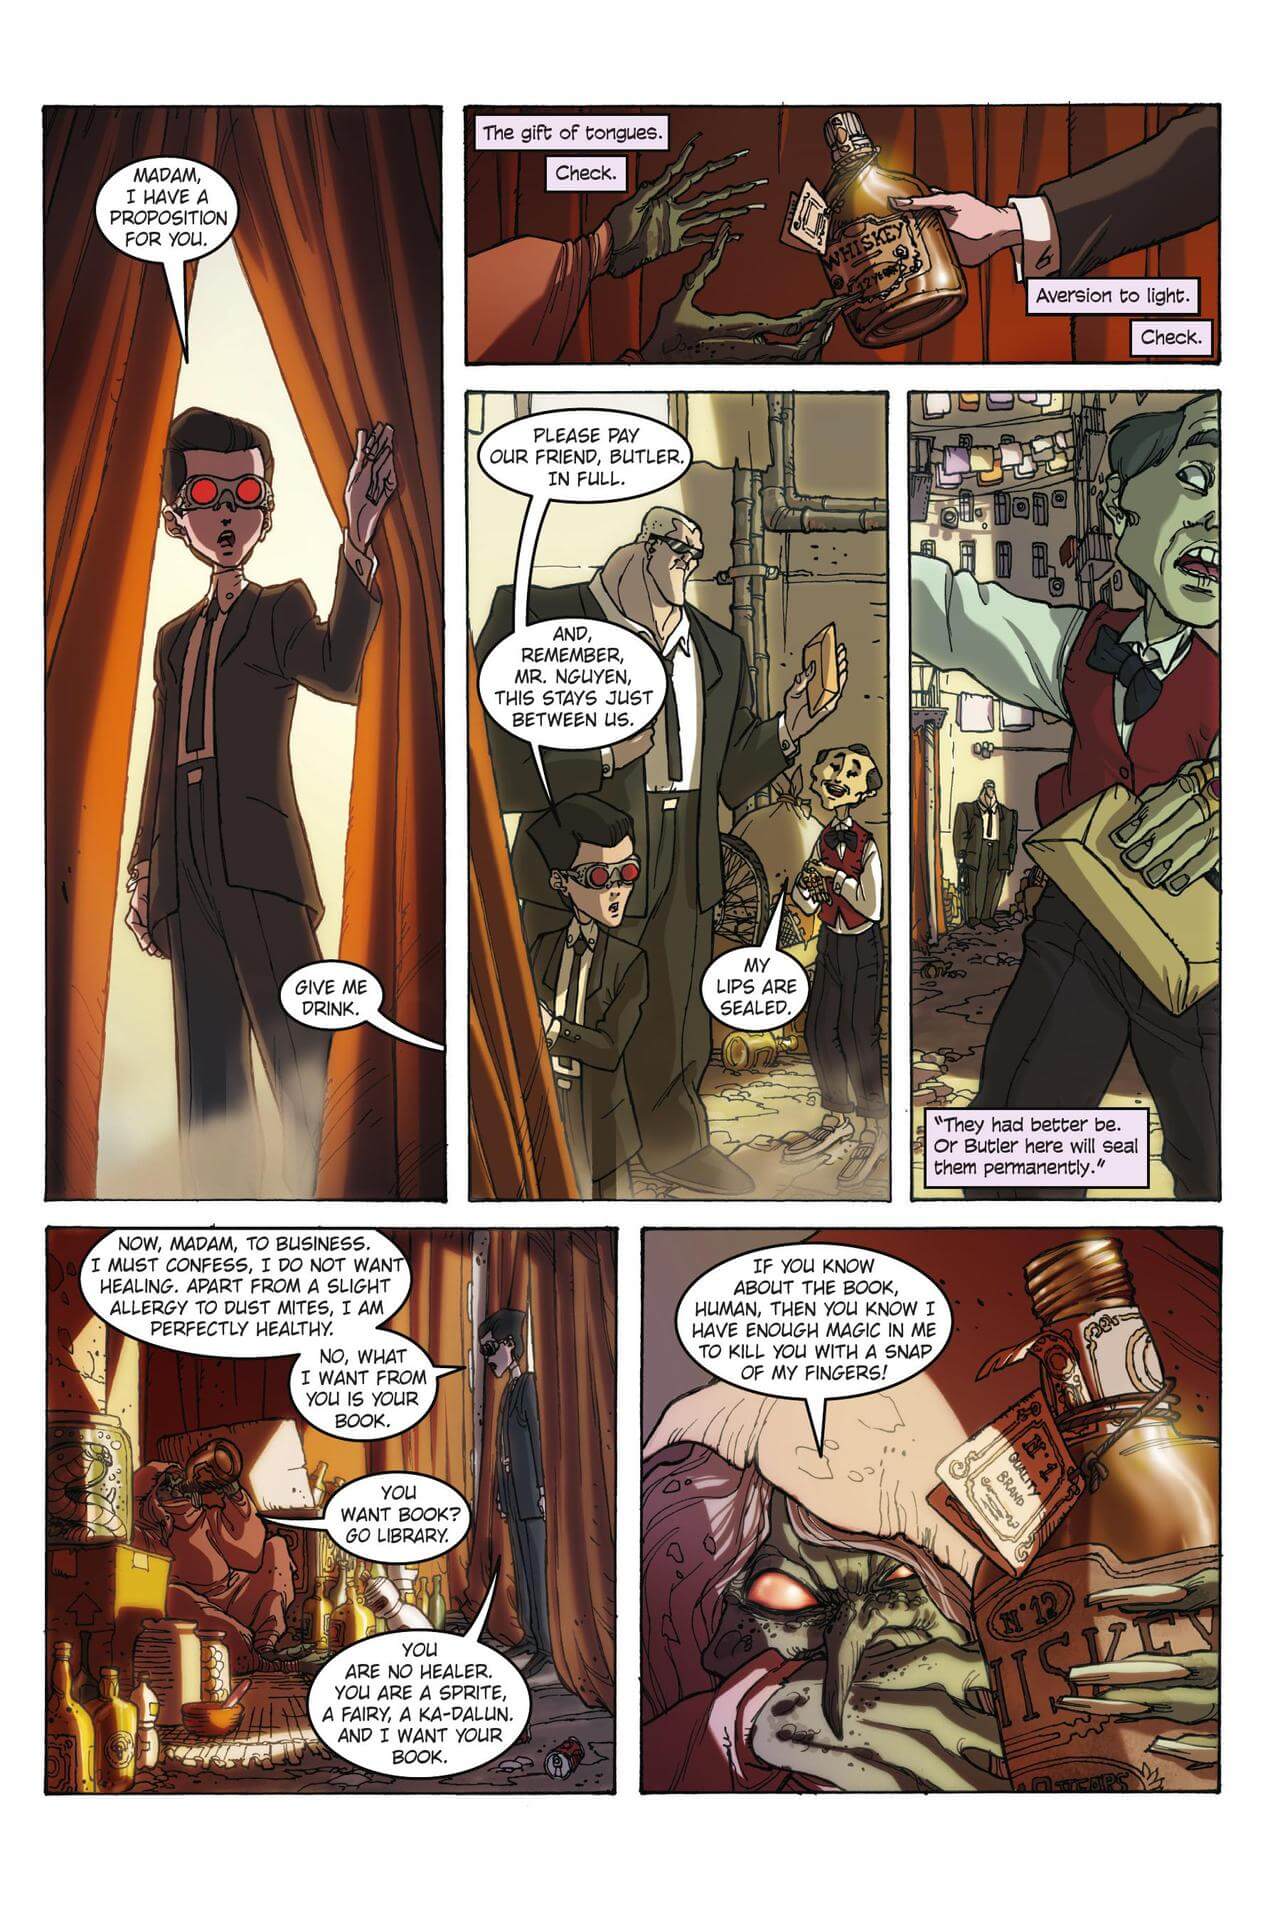 page 6 of artemis fowl the graphic novel